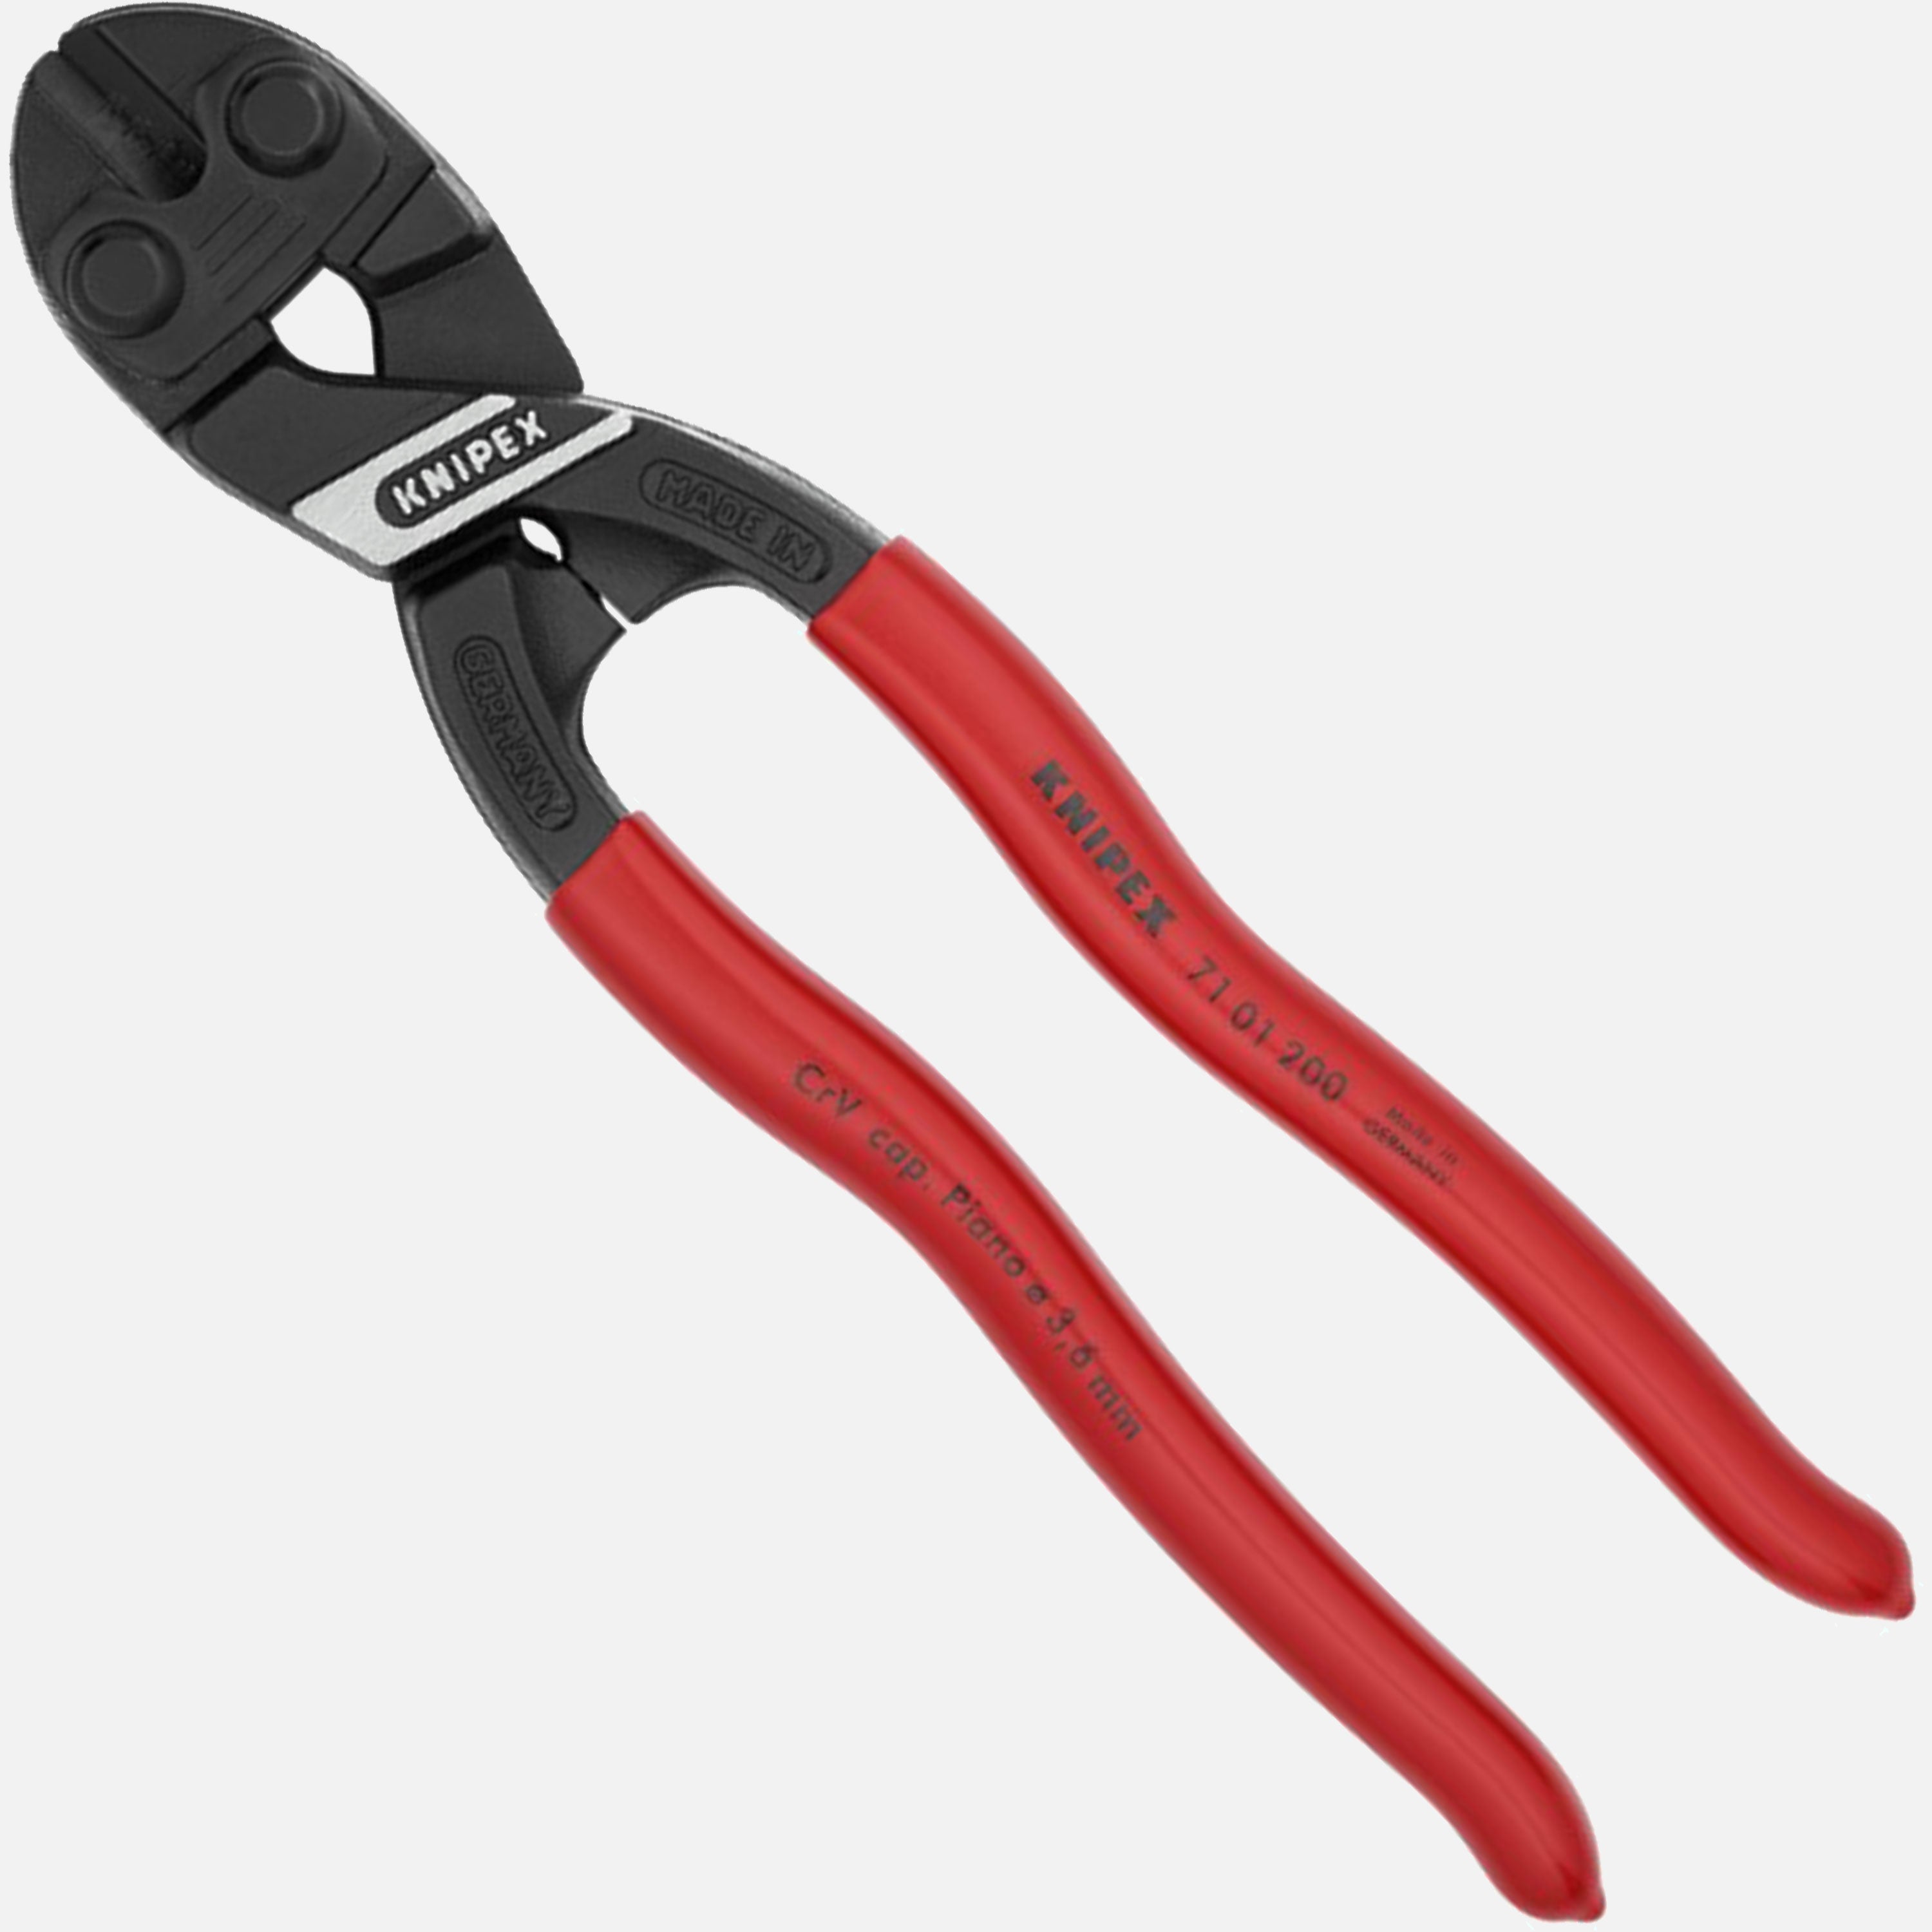 Great Neck BC8 Midget Bolt Cutters 8 in.